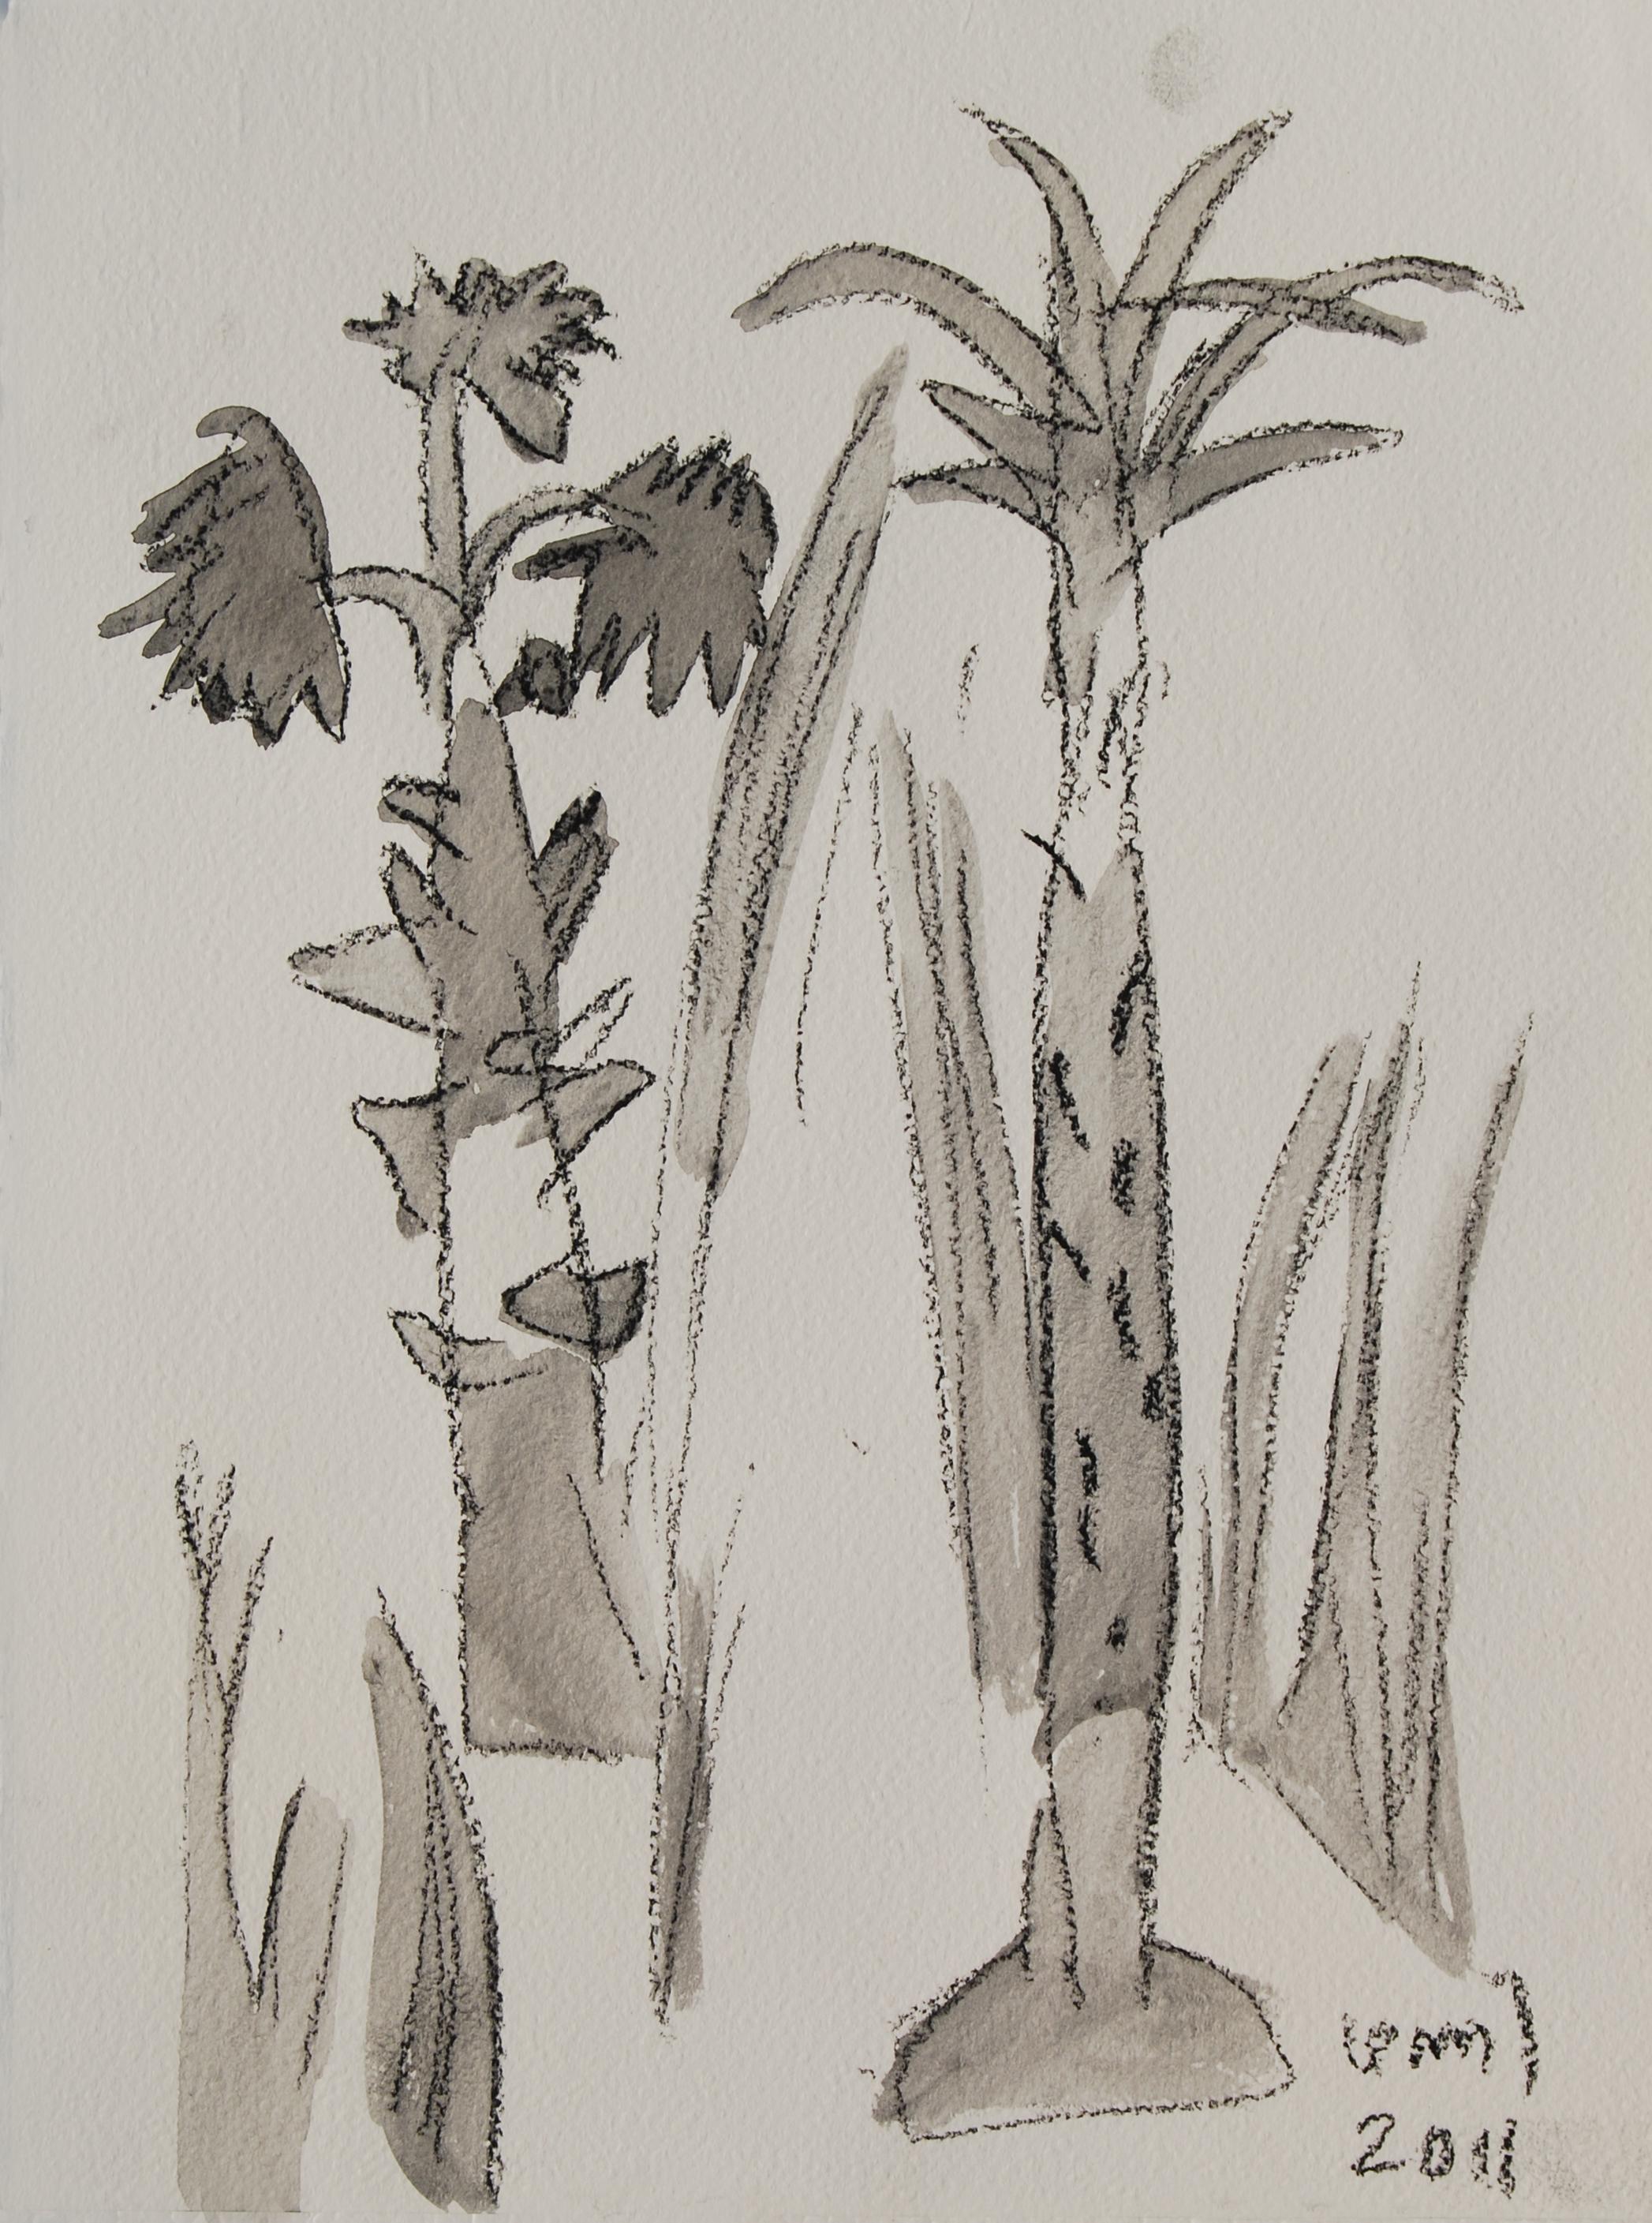 K.G. Subramanyan Figurative Art - Palm Grooves of South India, Charcoal & Wash on Paper, Grey, White "In Stock"